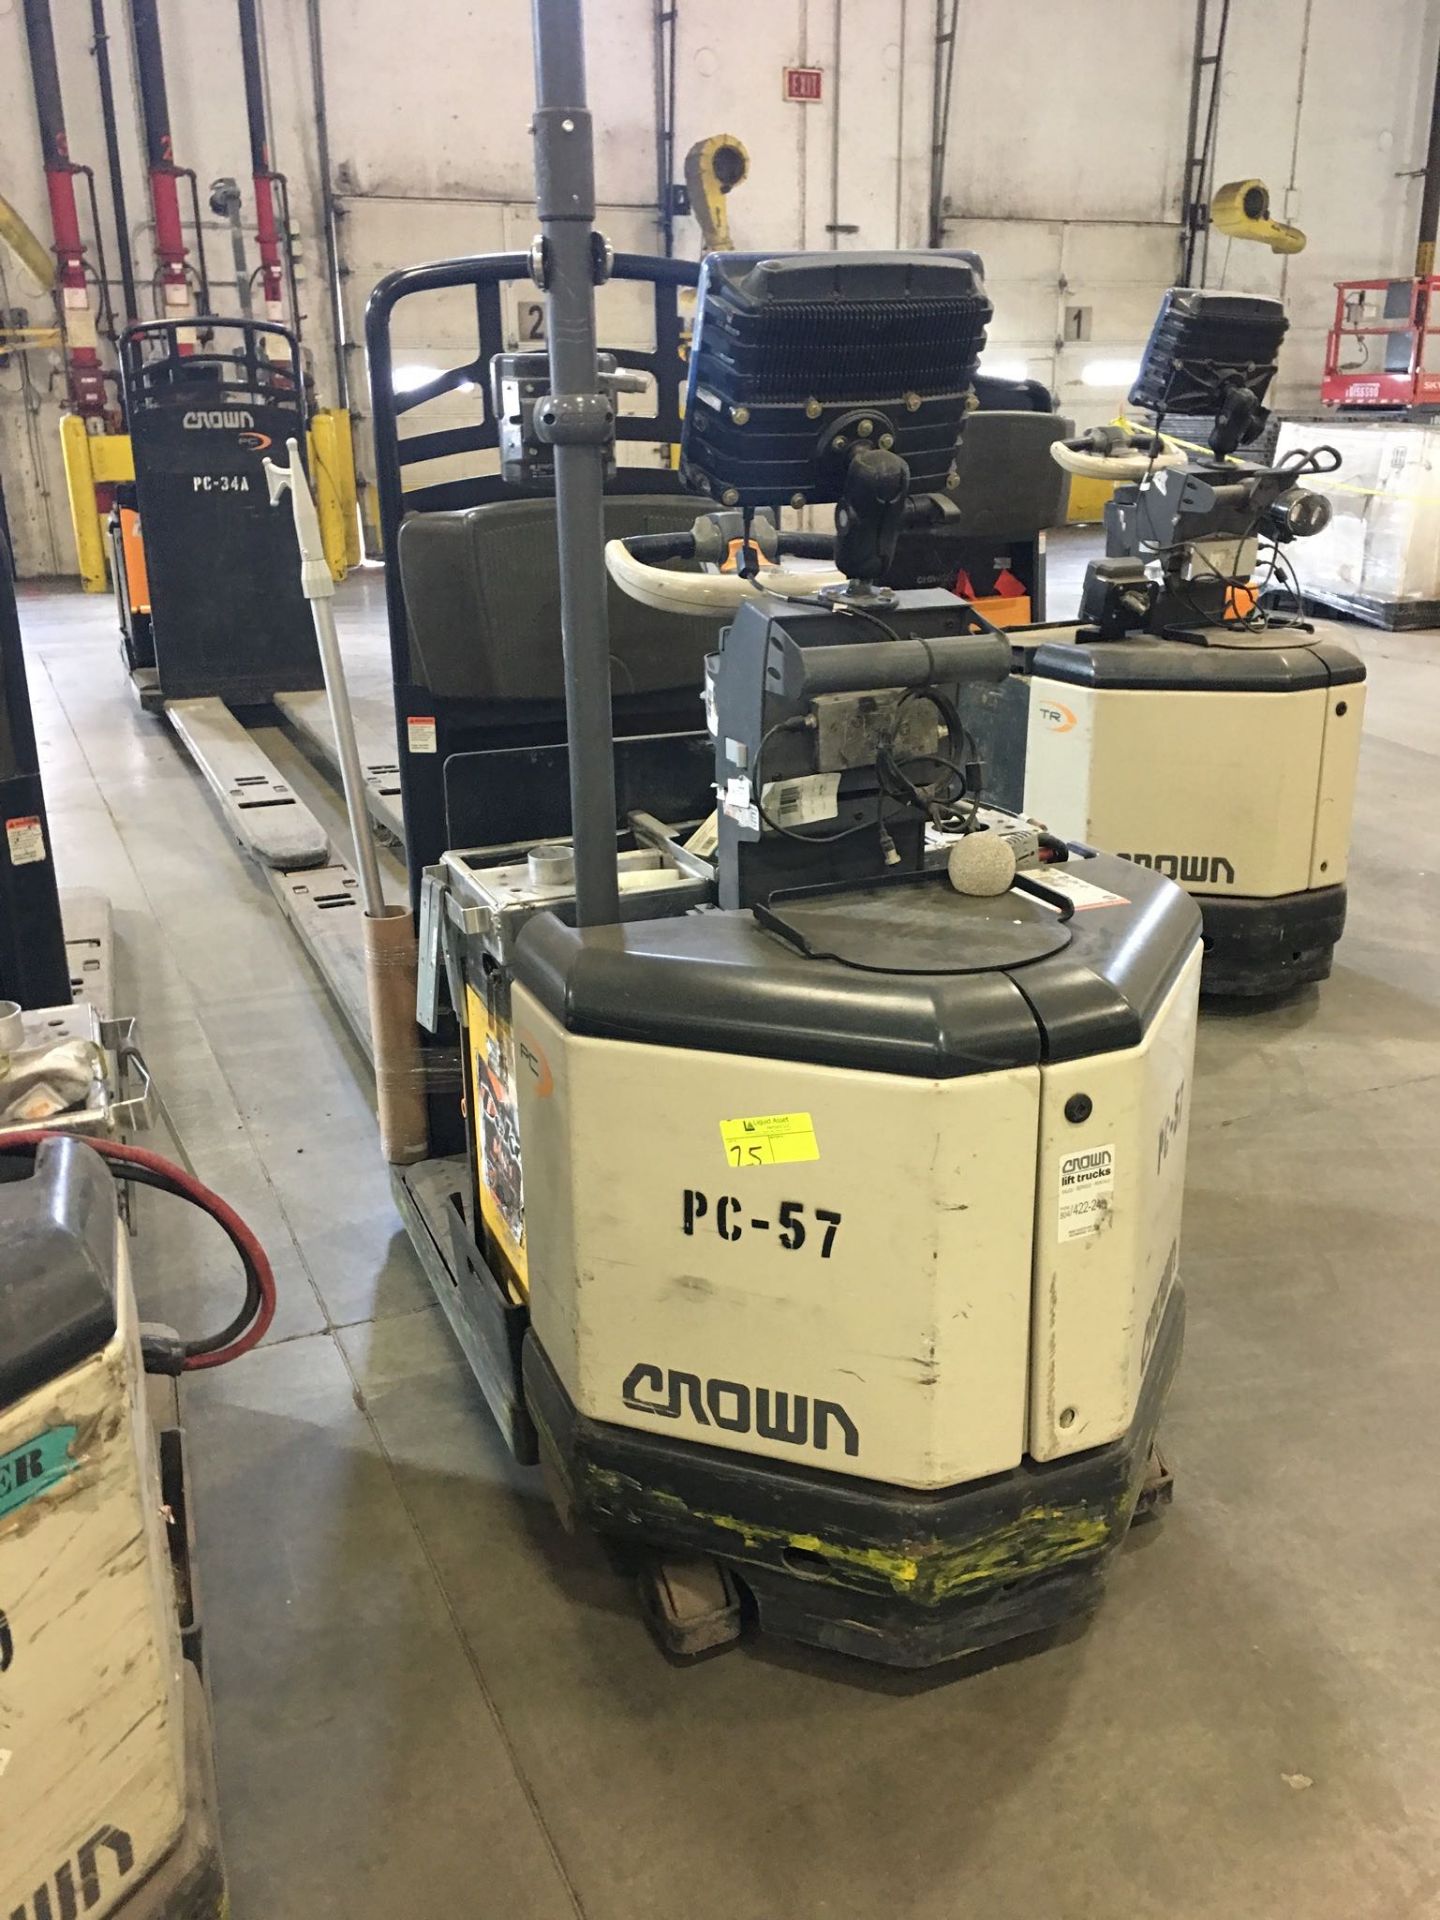 CROWN ELECTRIC PALLET JACK. Model #: PC4500. S/N: 10010493. Hours (as of Oct 15, 2018): 1177.